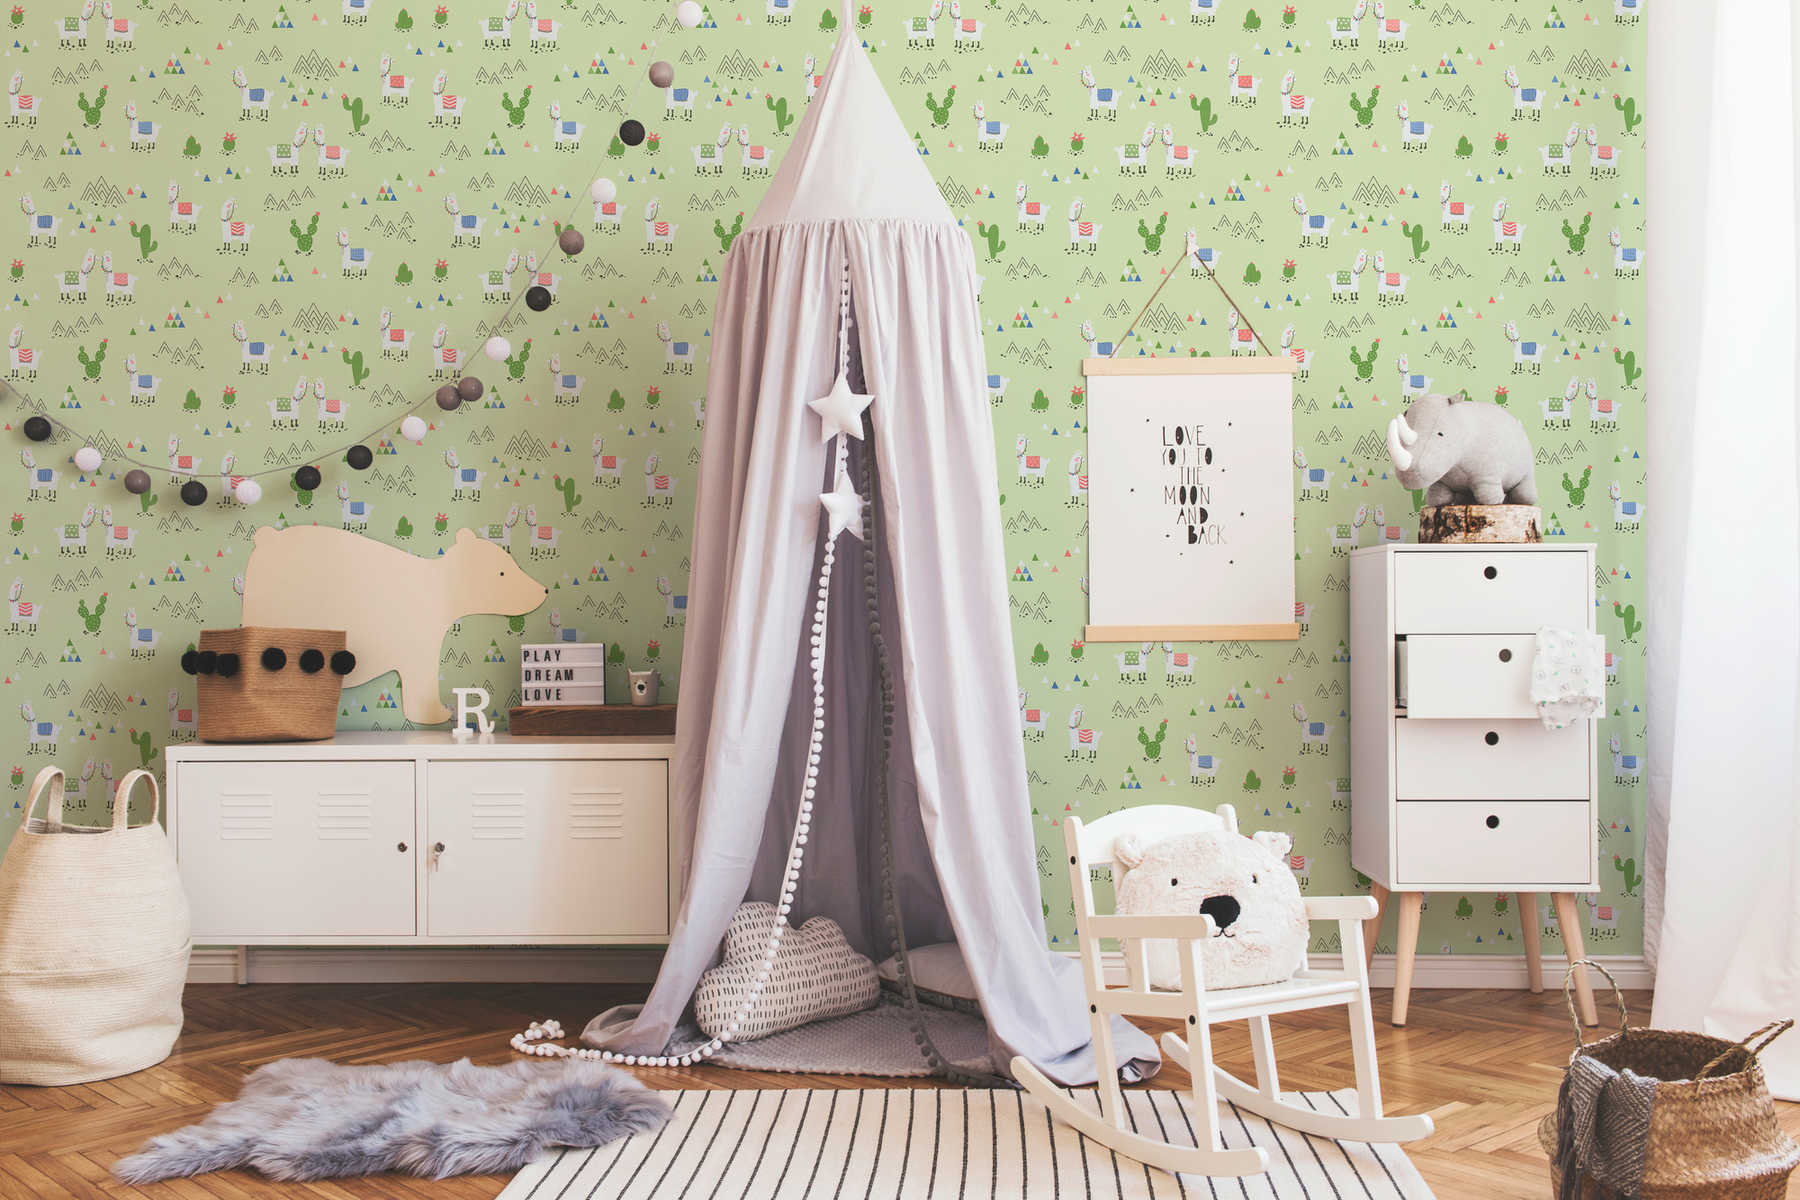             Non-woven wallpaper llama in comic style with textile look - green,
        